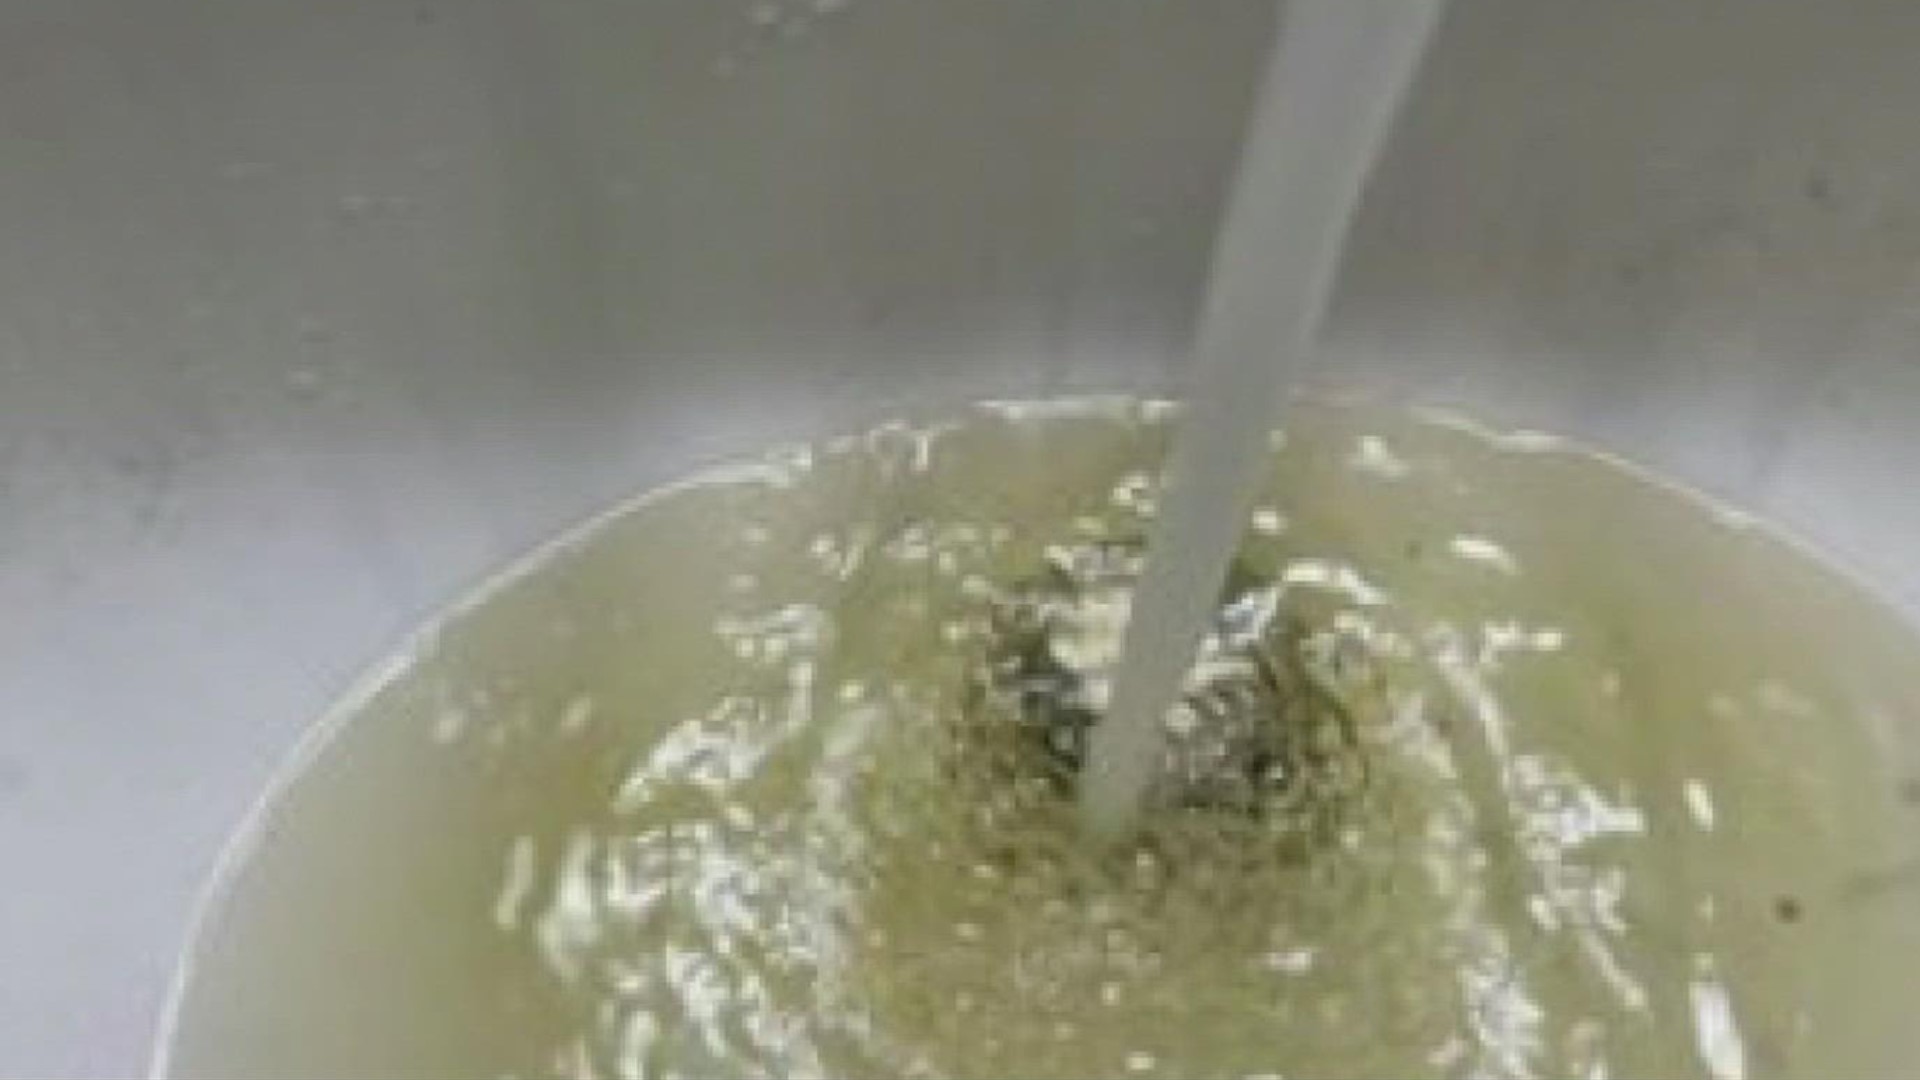 A change in the City's source water has caused residents in Annaville to notice a strange smell and coloration in their water. Here's why.